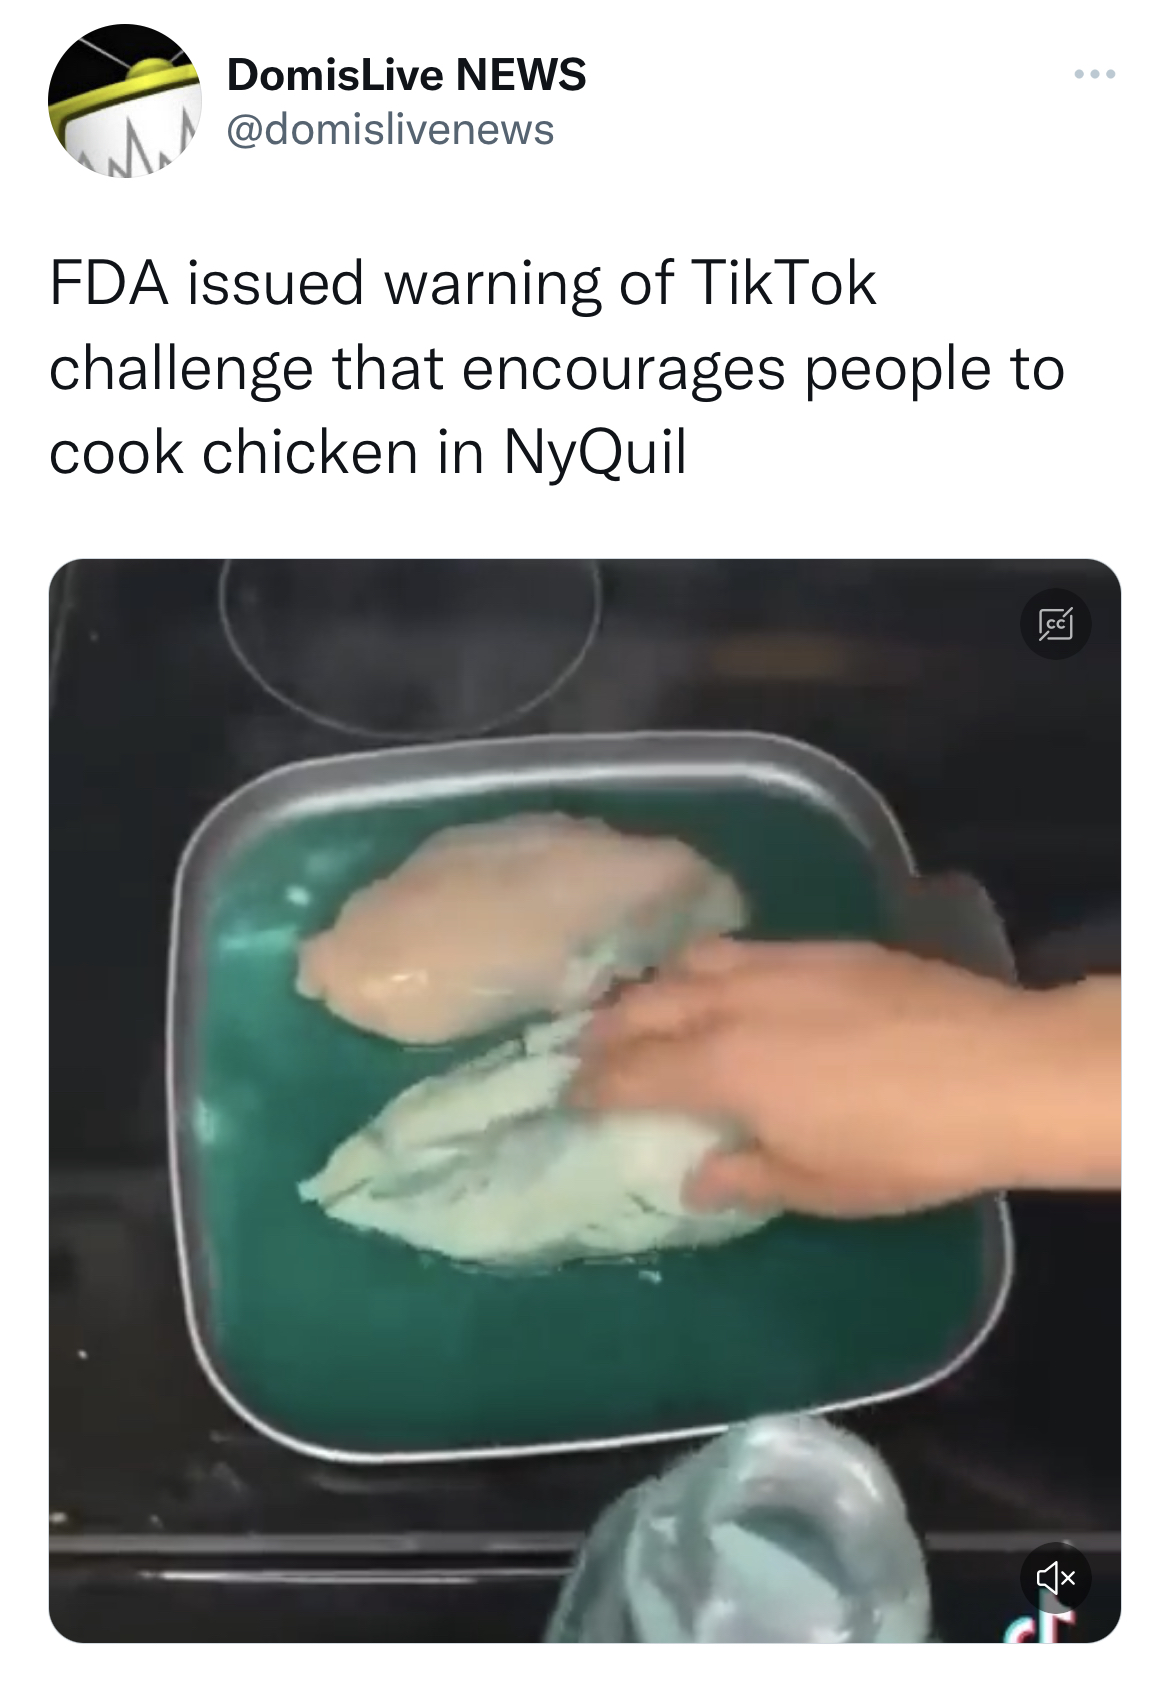 funny quick wit tweets - jaw - DomisLive News Fda issued warning of TikTok challenge that encourages people to cook chicken in NyQuil F 78 L